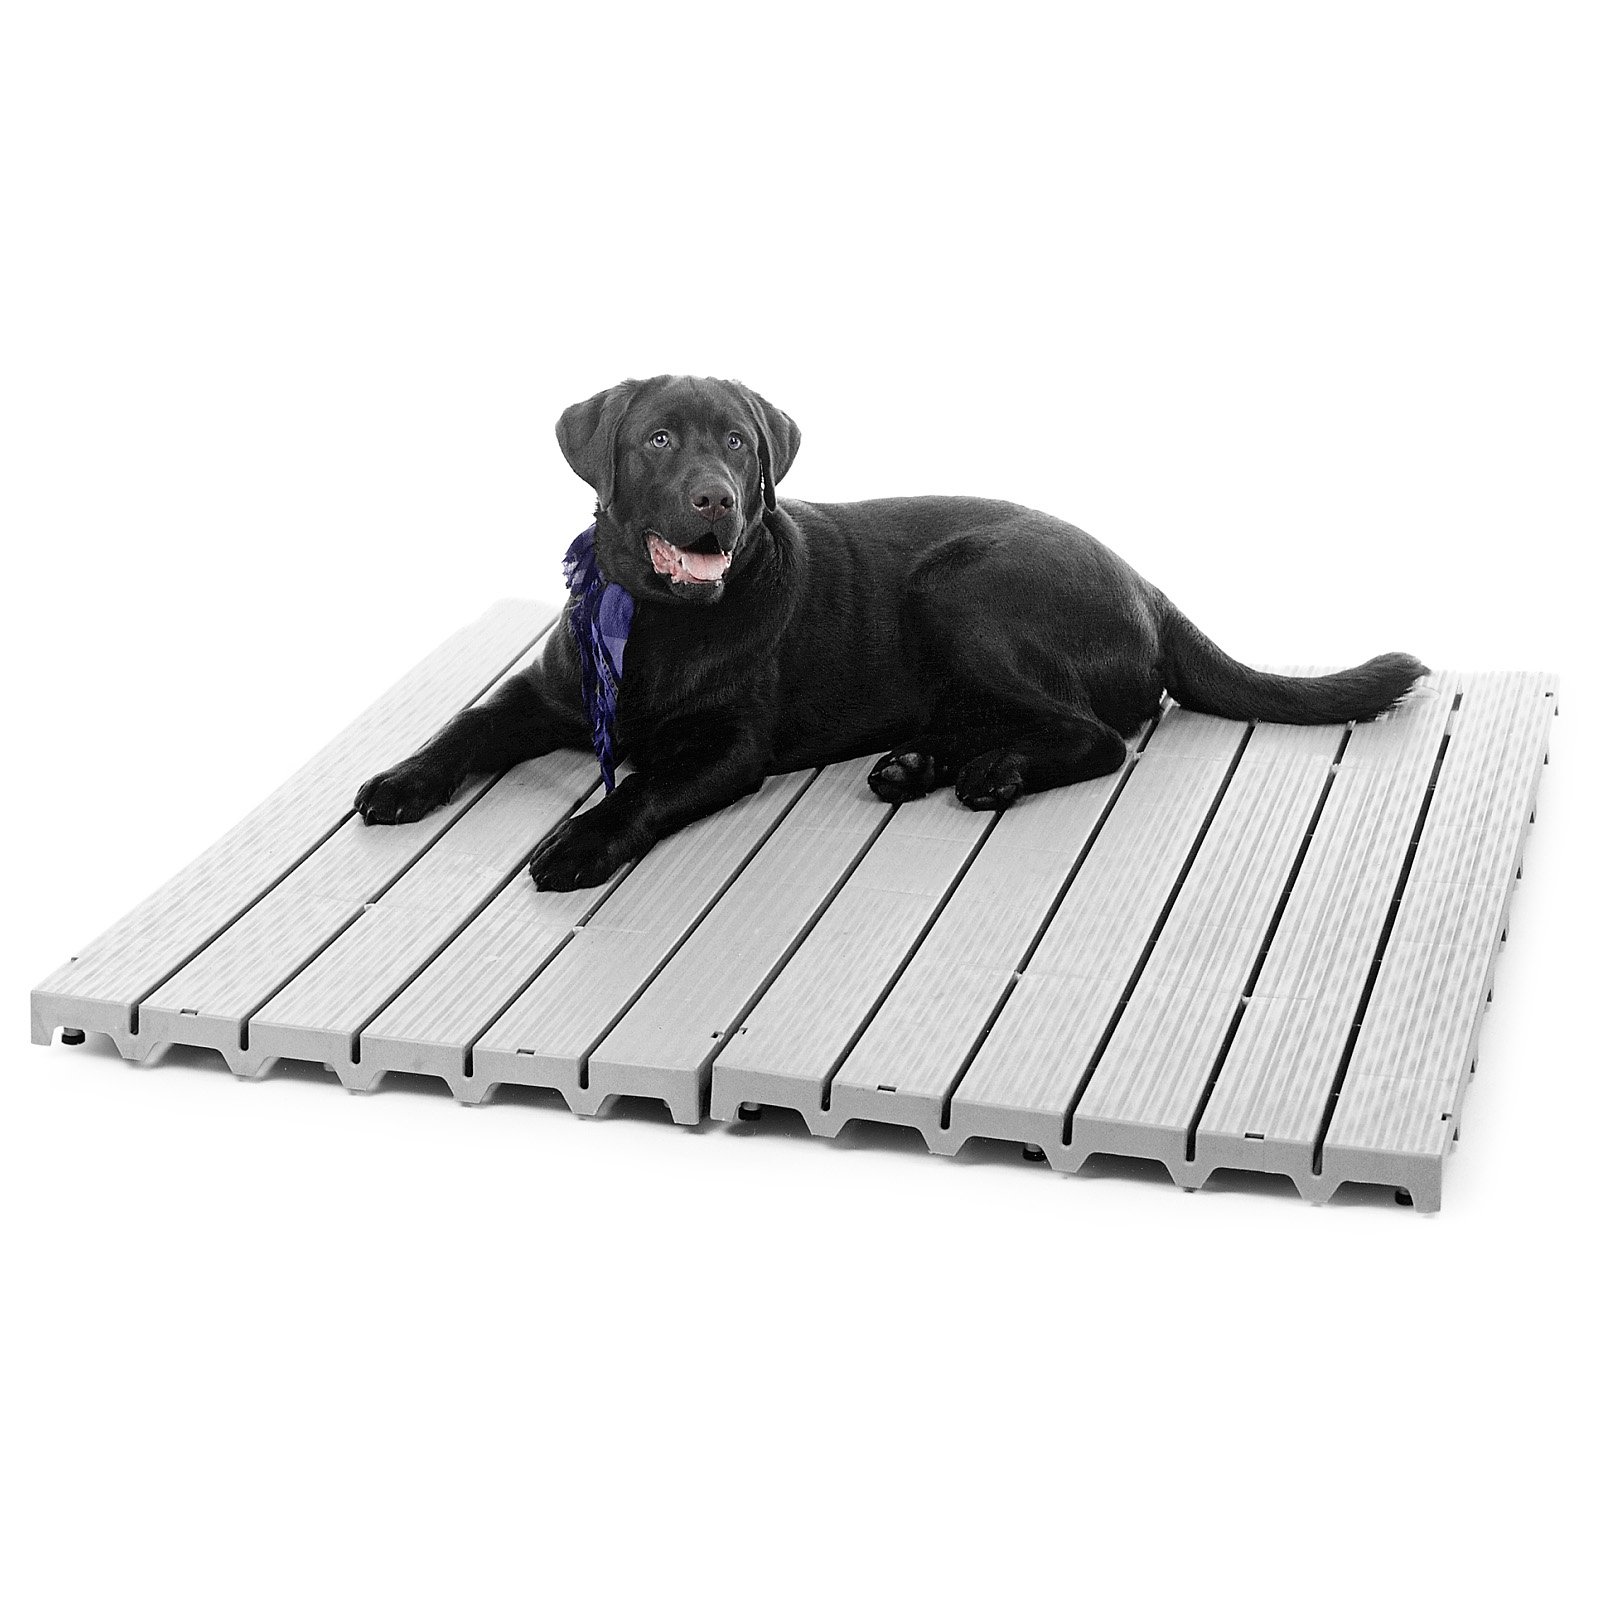 Kennel Deck - image 1 of 3